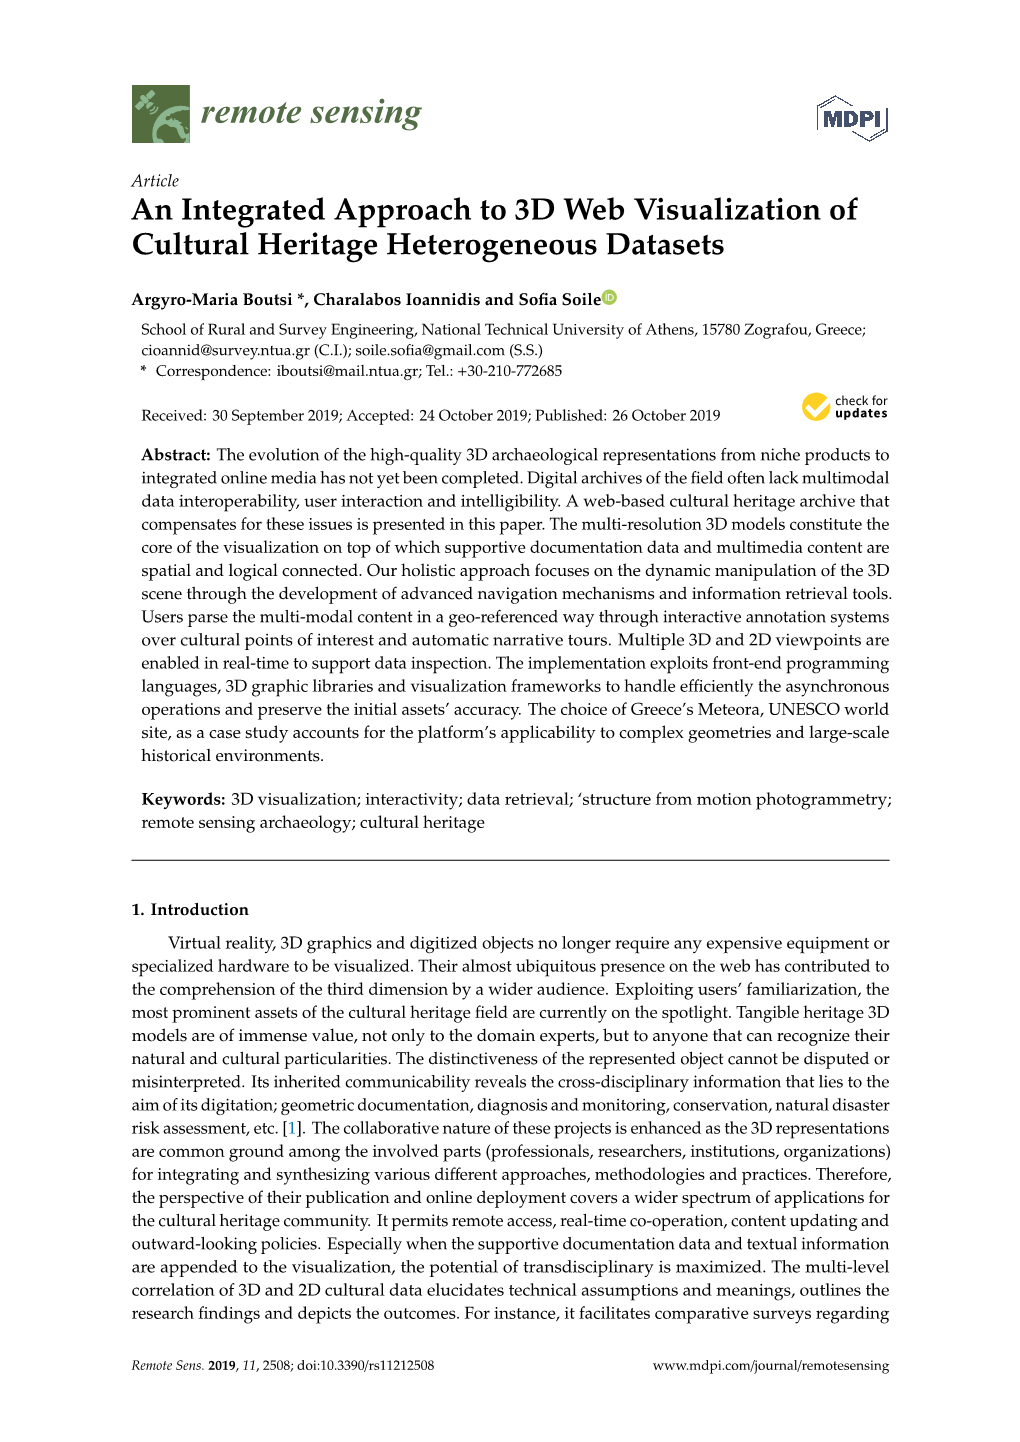 An Integrated Approach to 3D Web Visualization of Cultural Heritage Heterogeneous Datasets